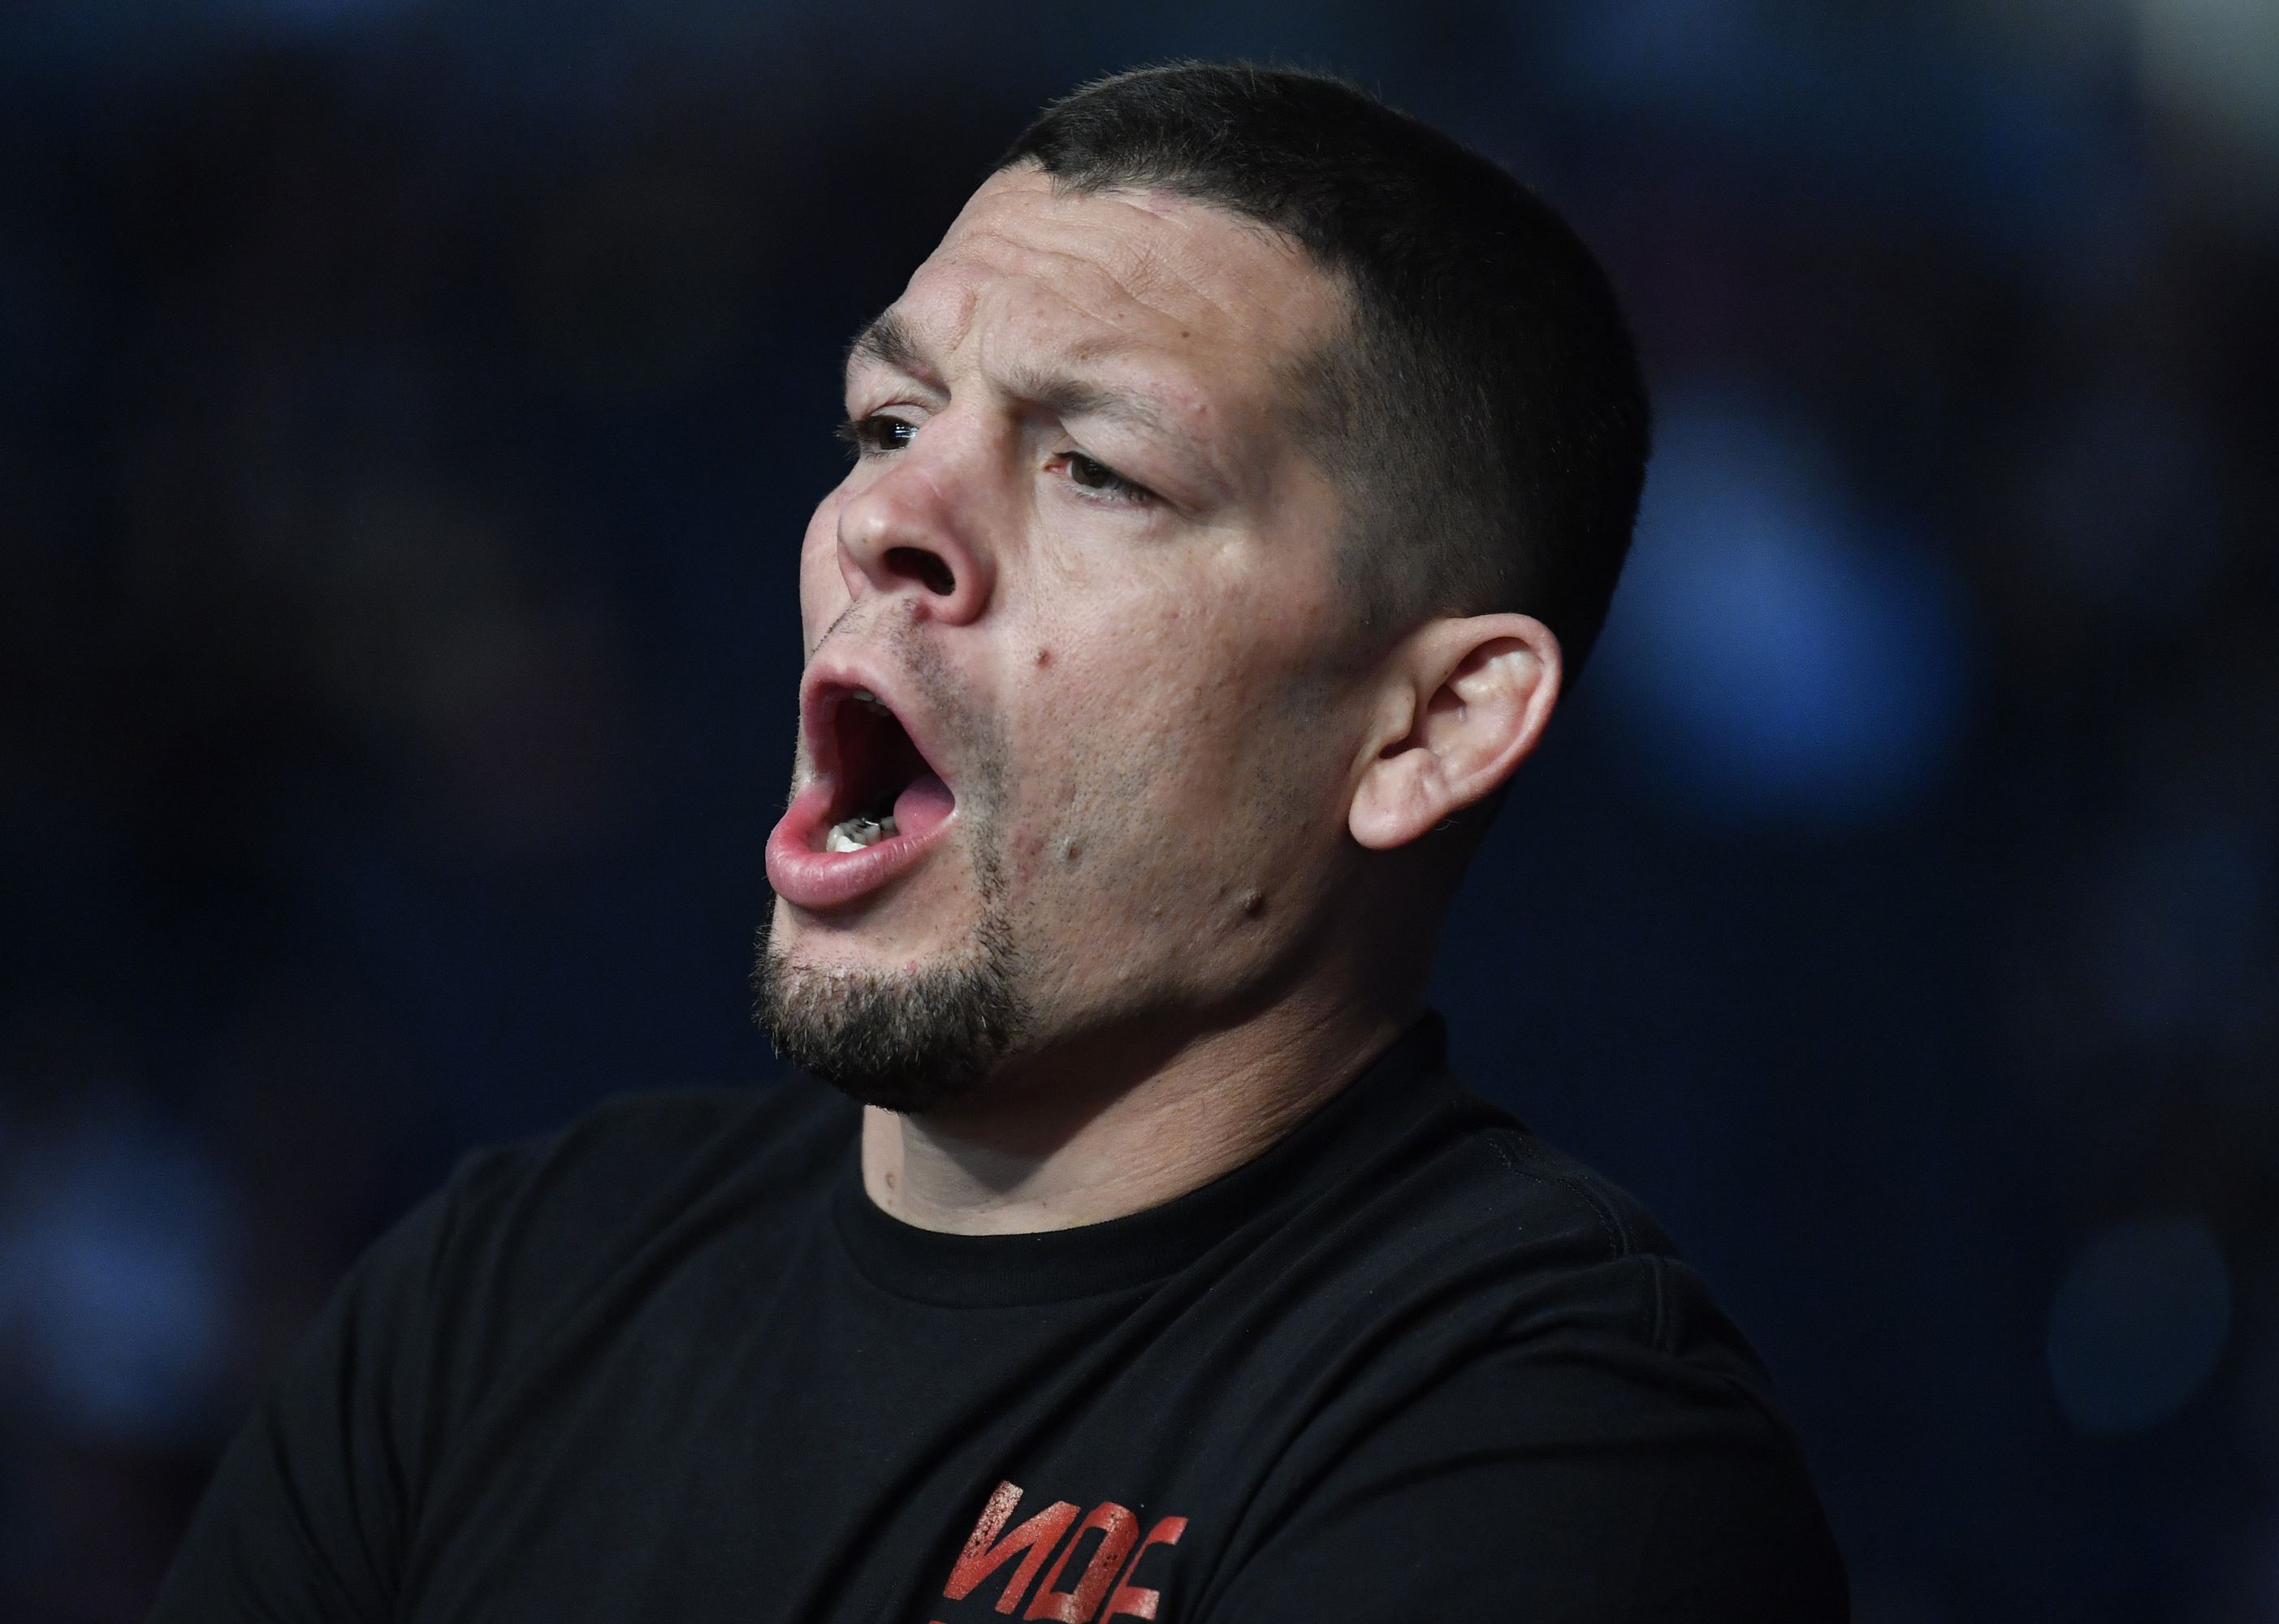 Nate Diaz: Jorge Masvidal sides with UFC on Nate Diaz's final fight dispute, says Diaz is faking for fans support